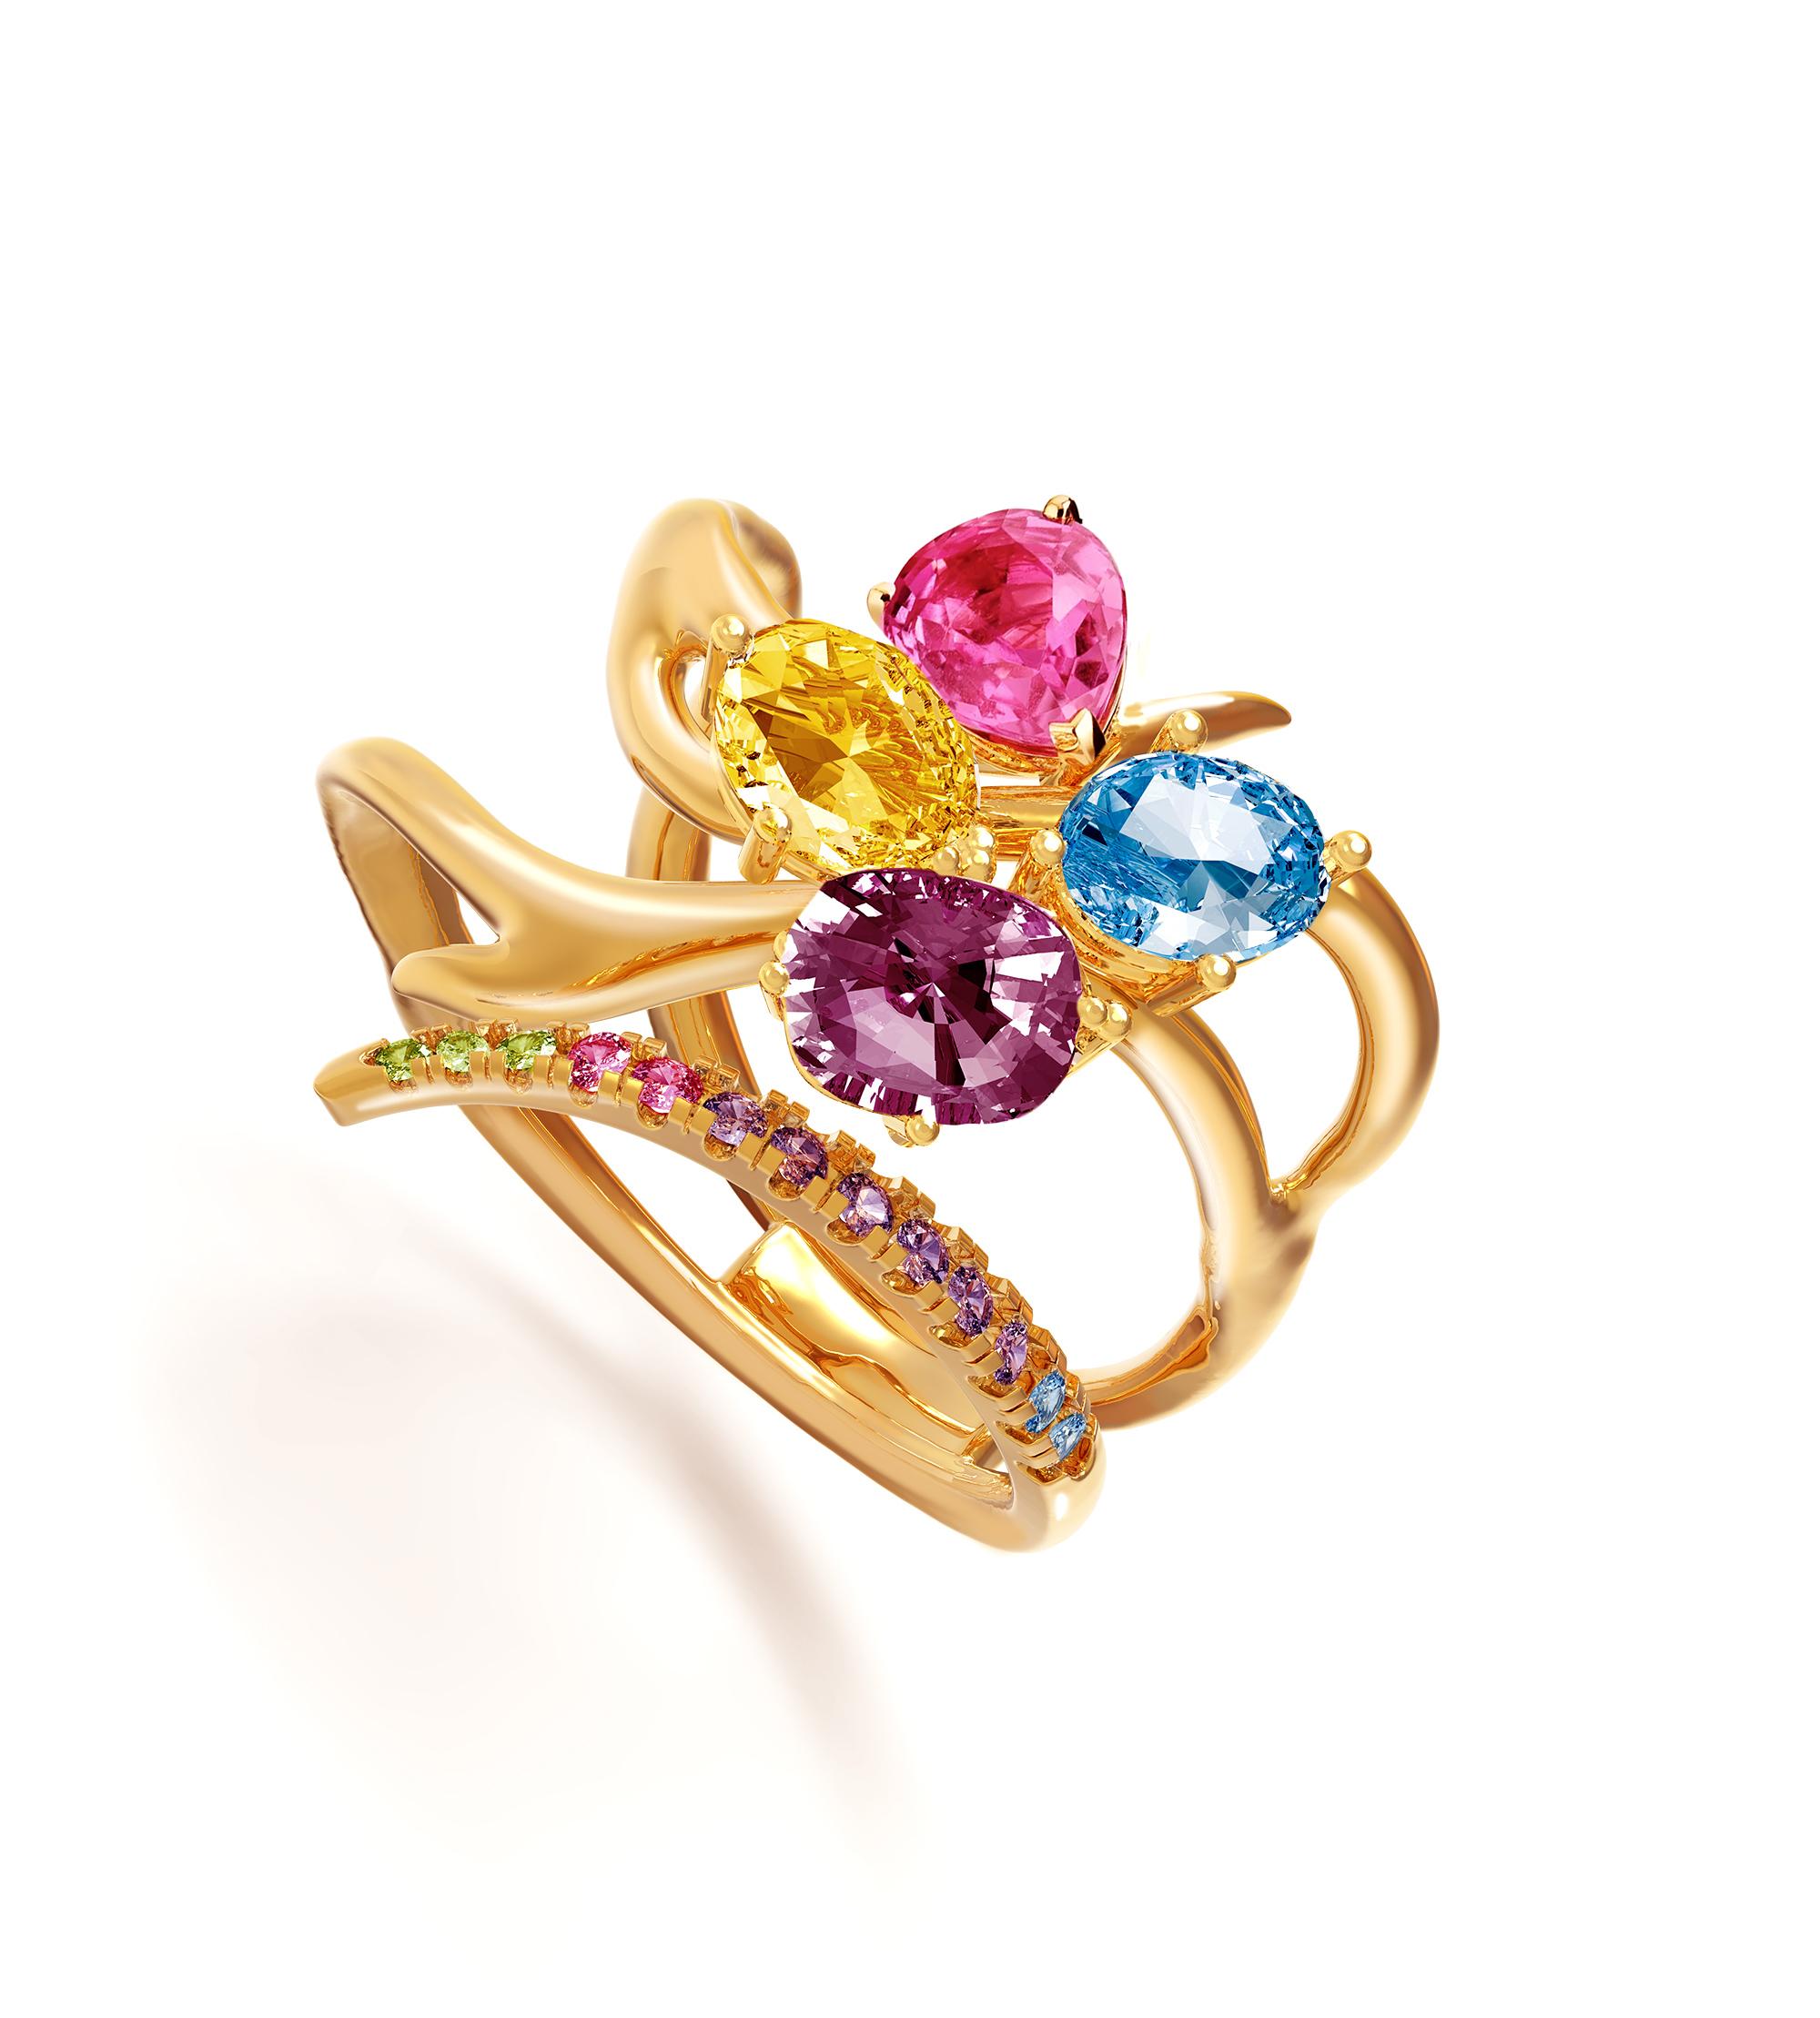 This Harajuku Anime contemporary Sculptural cocktail cluster ring is made of 18 karat yellow gold with natural gems on your choice custom made. This piece can be personally signed for the same price.
The gems are:
Oval cut pink sapphire;
Yellow